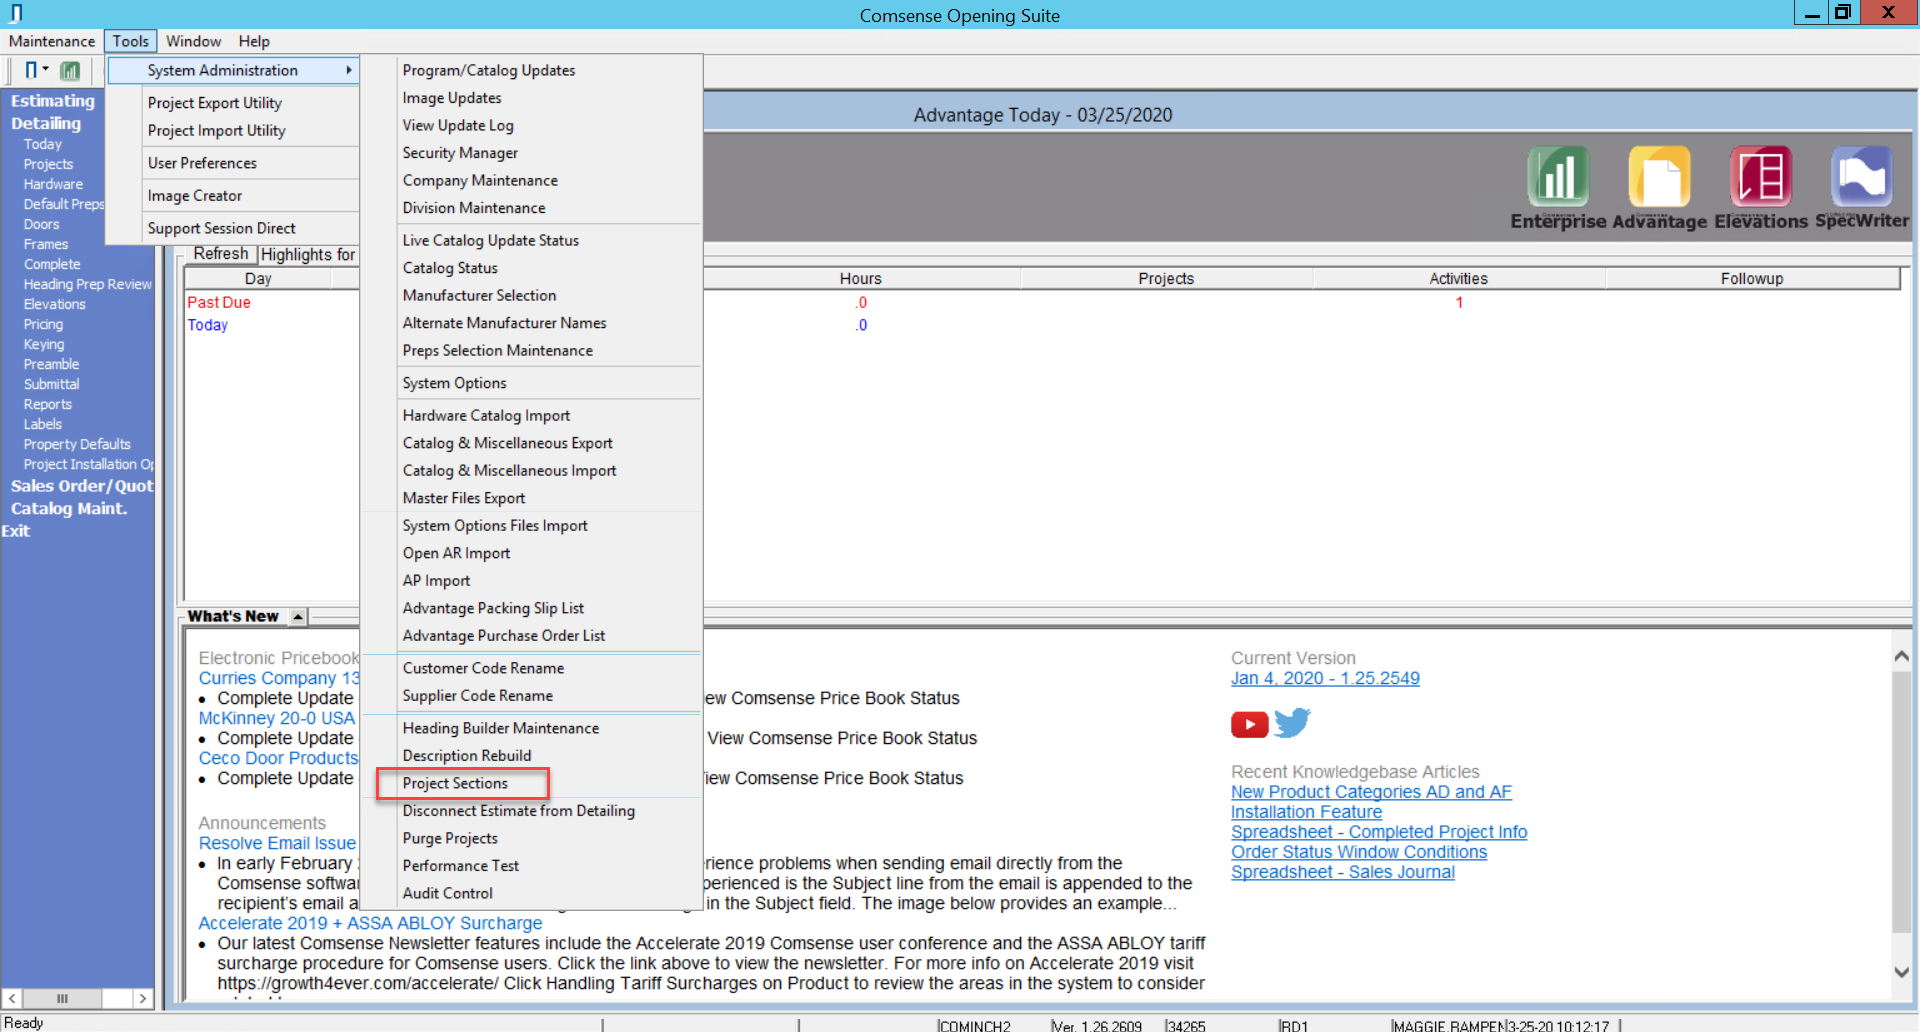 Advantage window; shows System Administration drop-down and location of Project Sections.